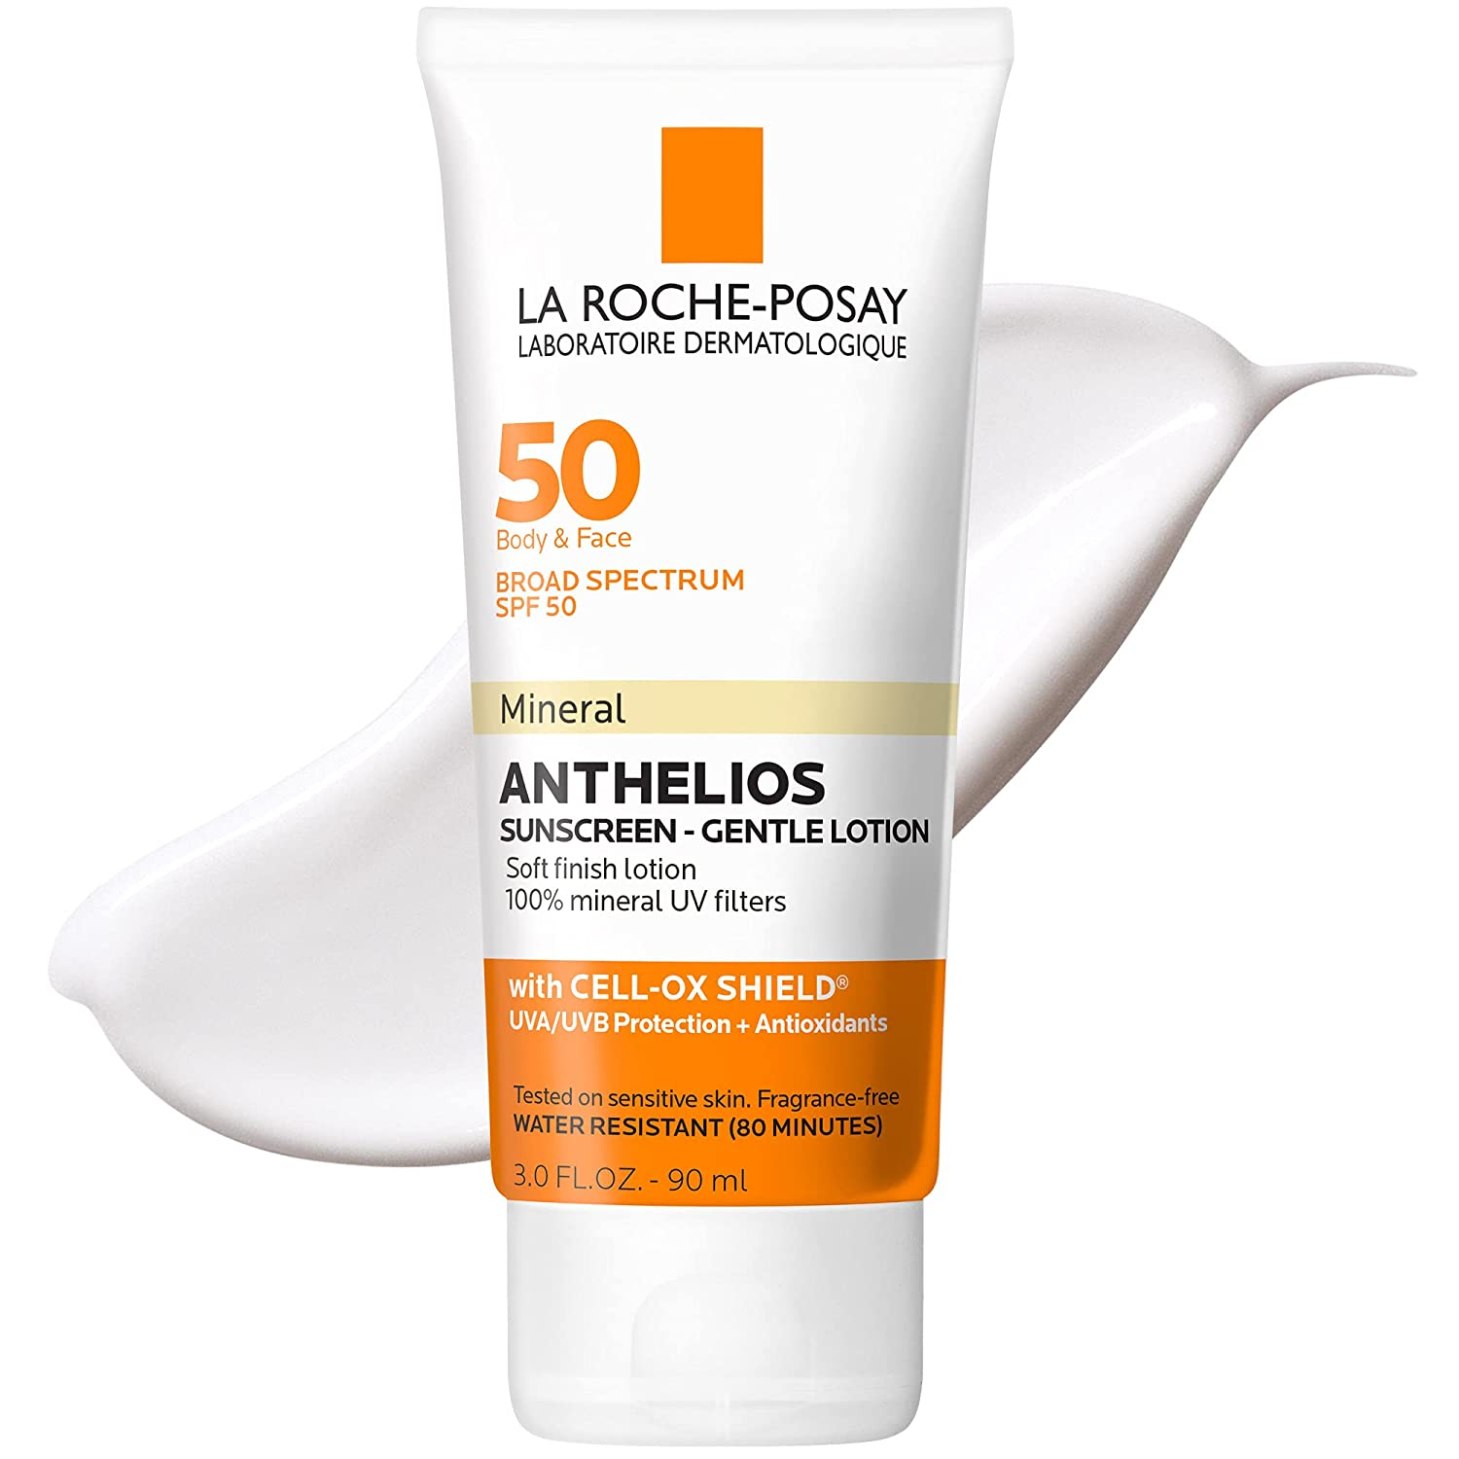 La Roche-Posay Anthelios Mineral Sunscreen Gentle Lotion Broad Spectrum SPF 50, Face and Body